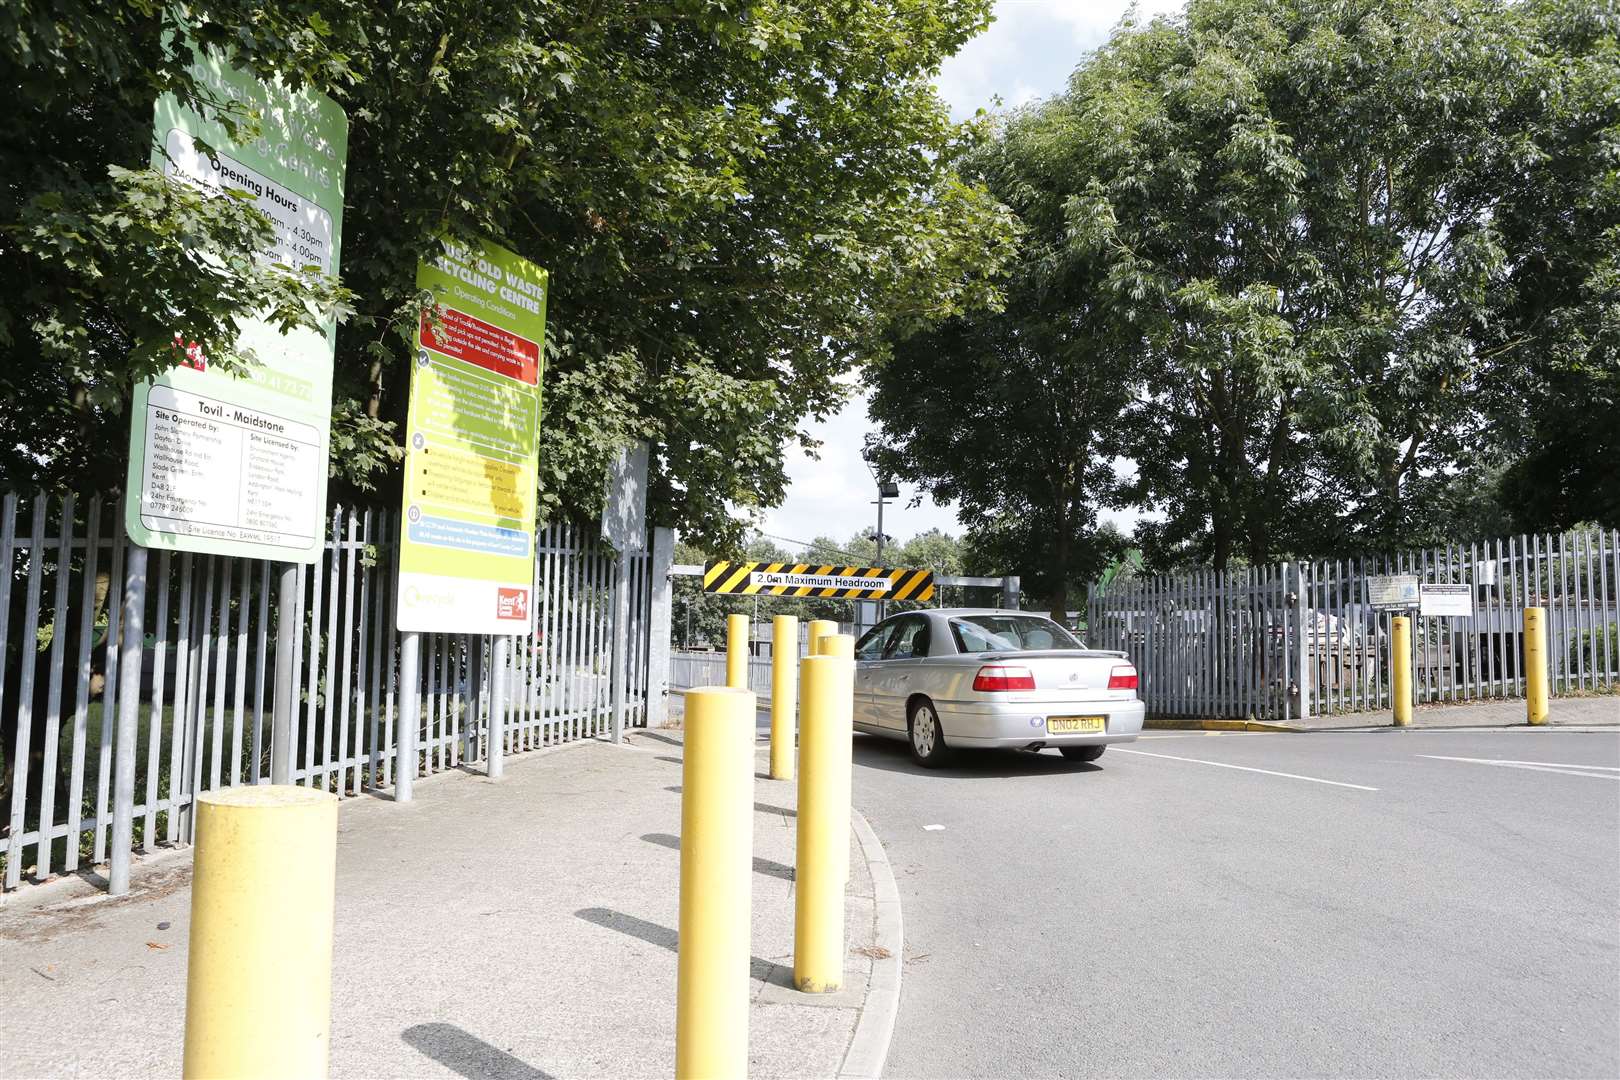 The Tovil Household Waste Recycling Centre could be axed